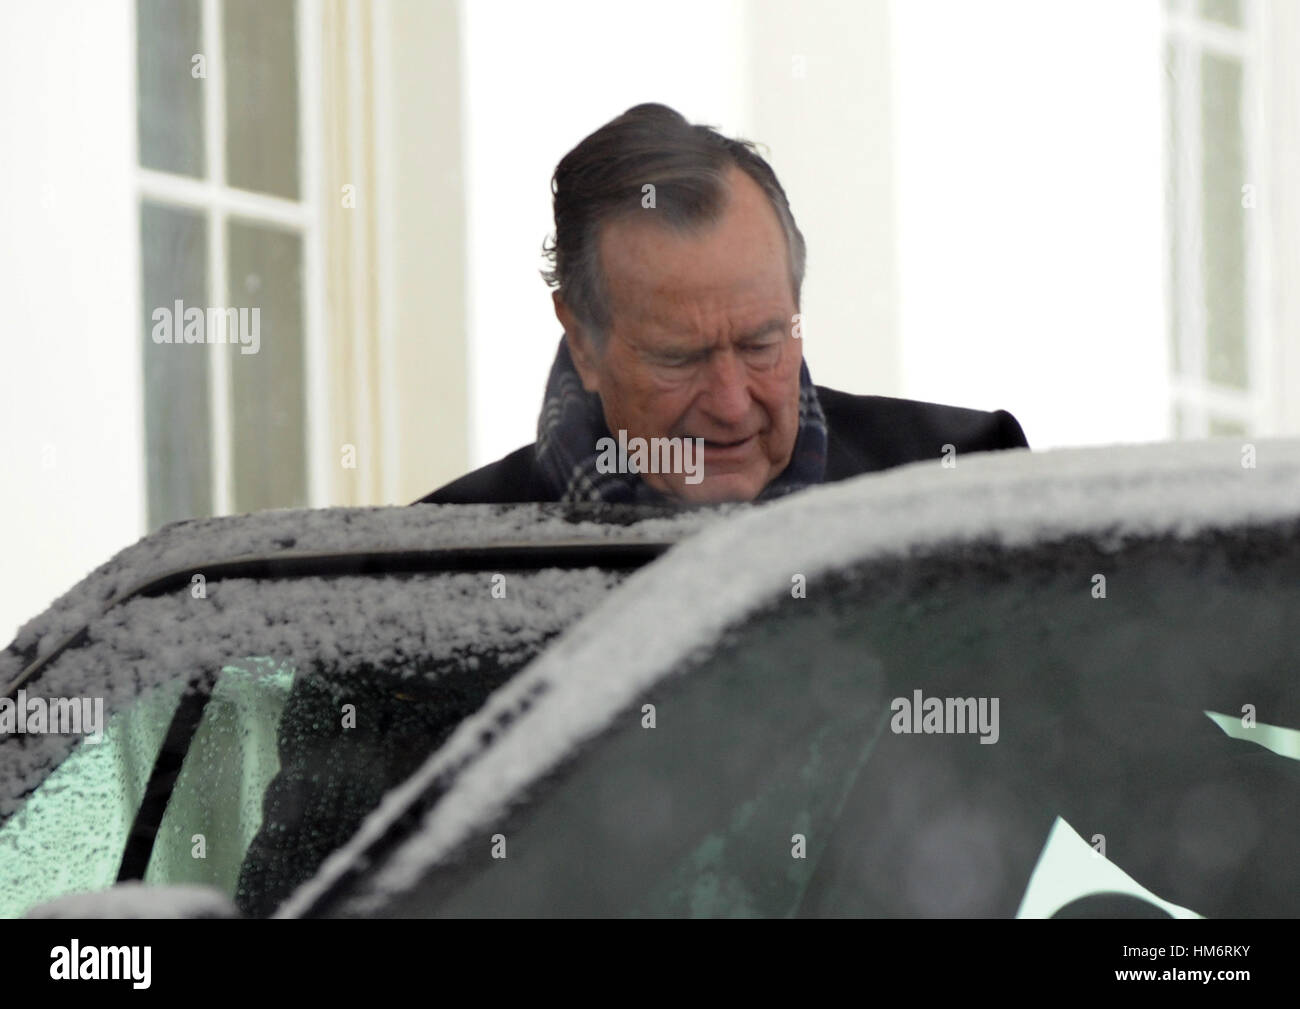 Former United States President George H.W. Bush departs the West Wing of the White House after he and and his son former Florida Governor Jeb Bush met with U.S. President Barack Obama in Washington, D.C. on Saturday, January 30, 2010. .Credit: Alexis C. G Stock Photo